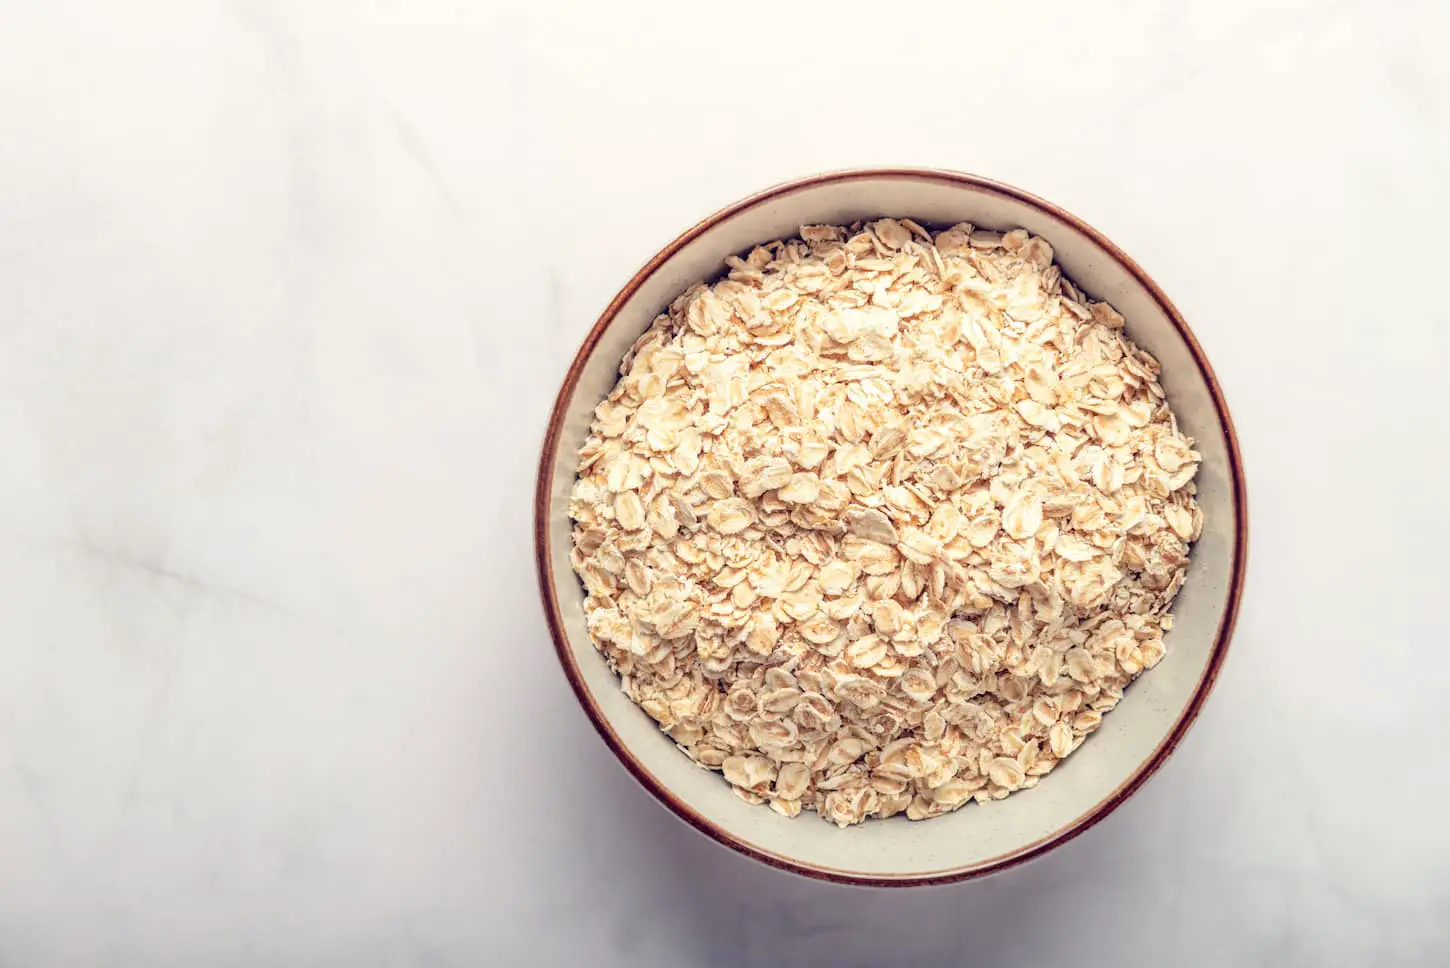 An image of Gluten-Free Rolled whole grain oats in a bowl on a marble background.